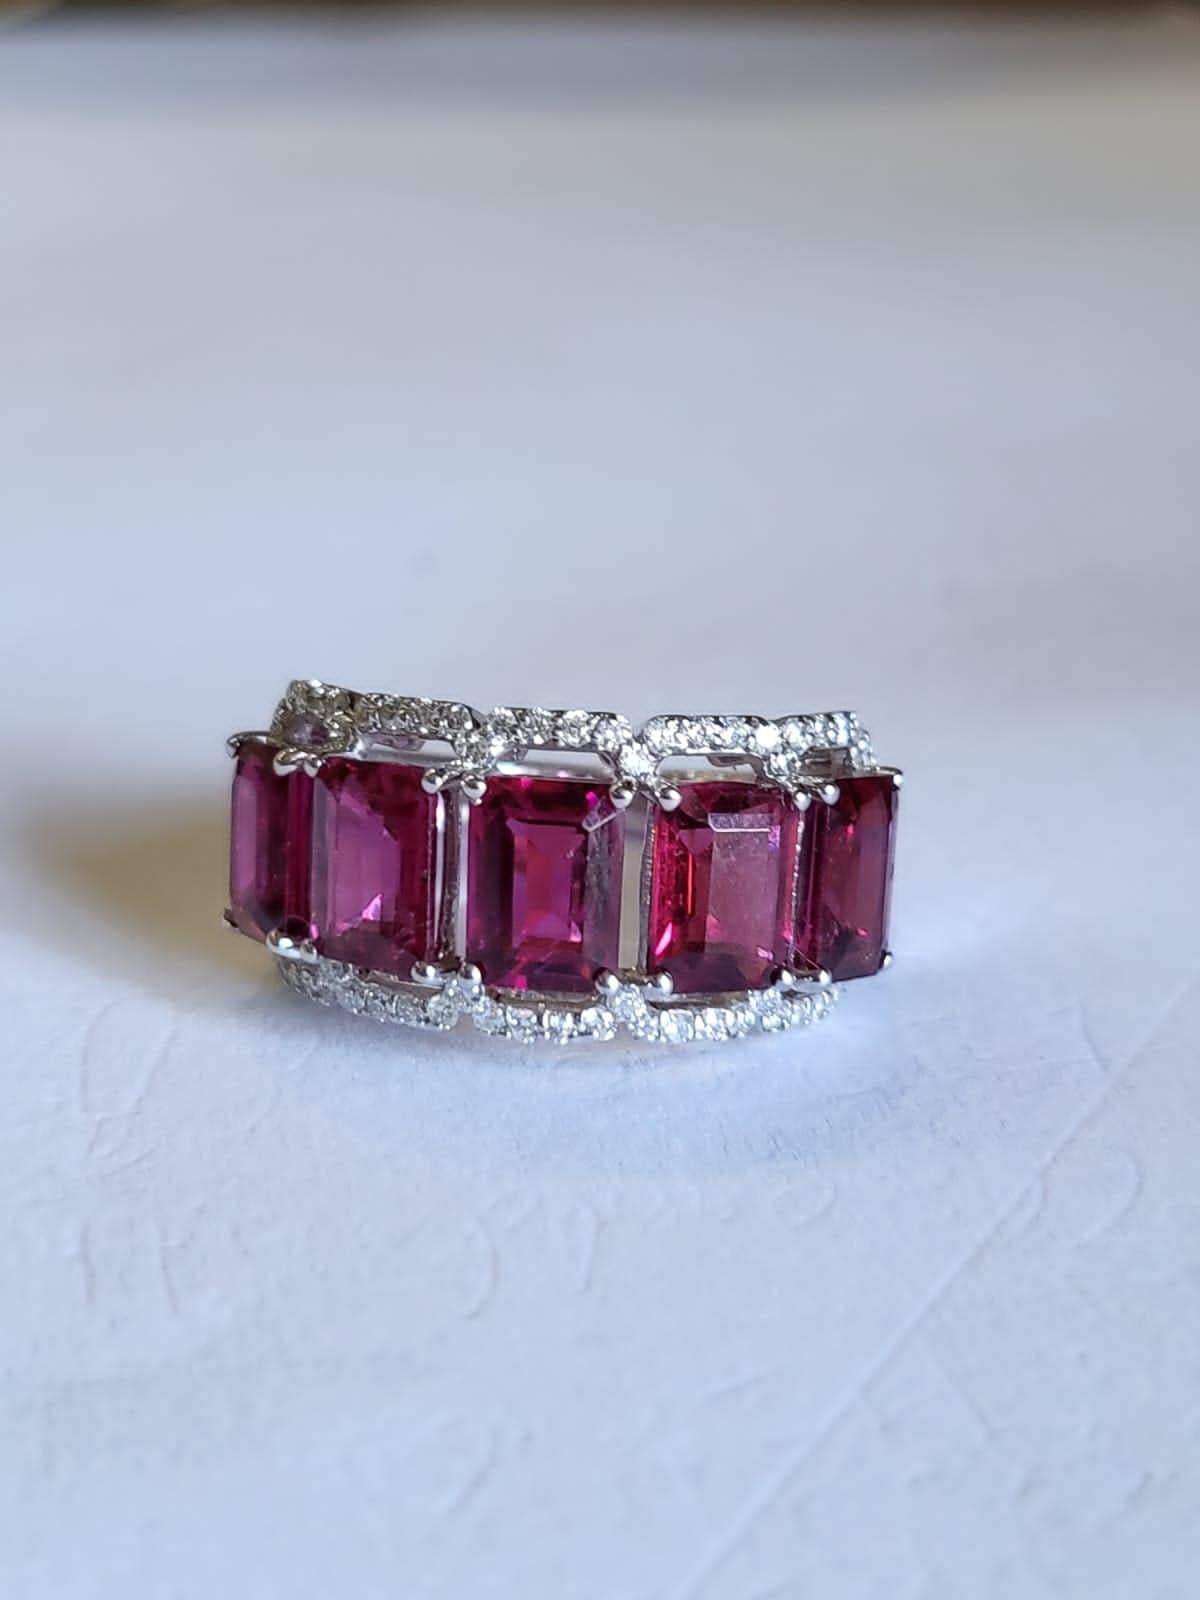 A very gorgeous and one of a kind, Rubellite Band Ring set in 18K White Gold & Diamonds. The weight of the Rubellite is 4.79 carats. The weight of the Diamonds is 0.49 carats. Net Gold weight is 5.40 grams. The dimensions of the ring are 1.10cm x